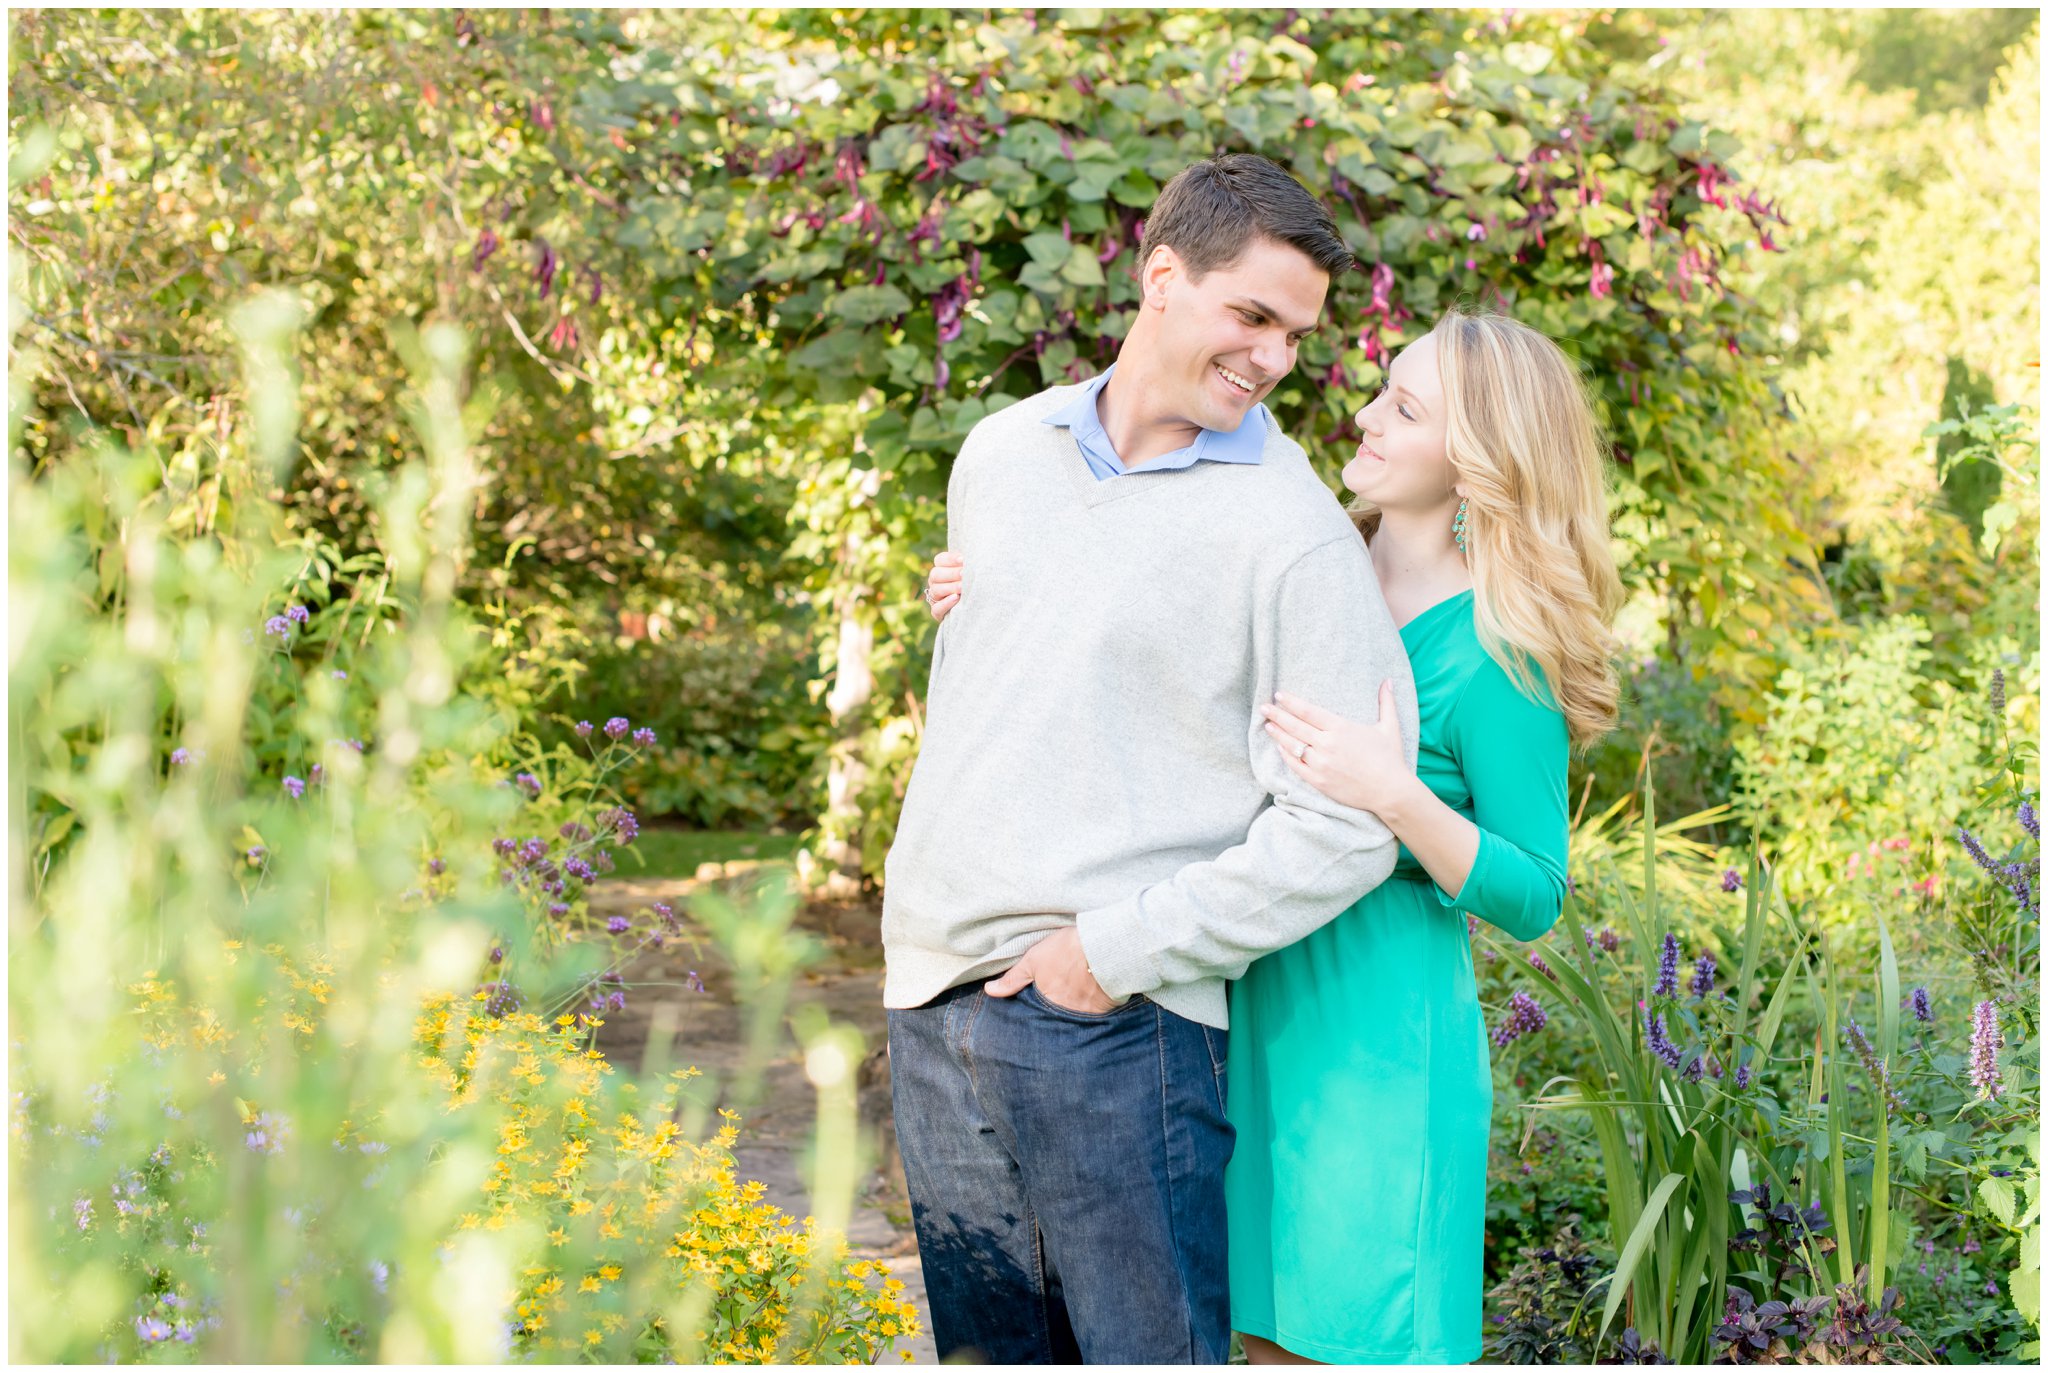 What to wear for your engagement session - Laura Lee Photography